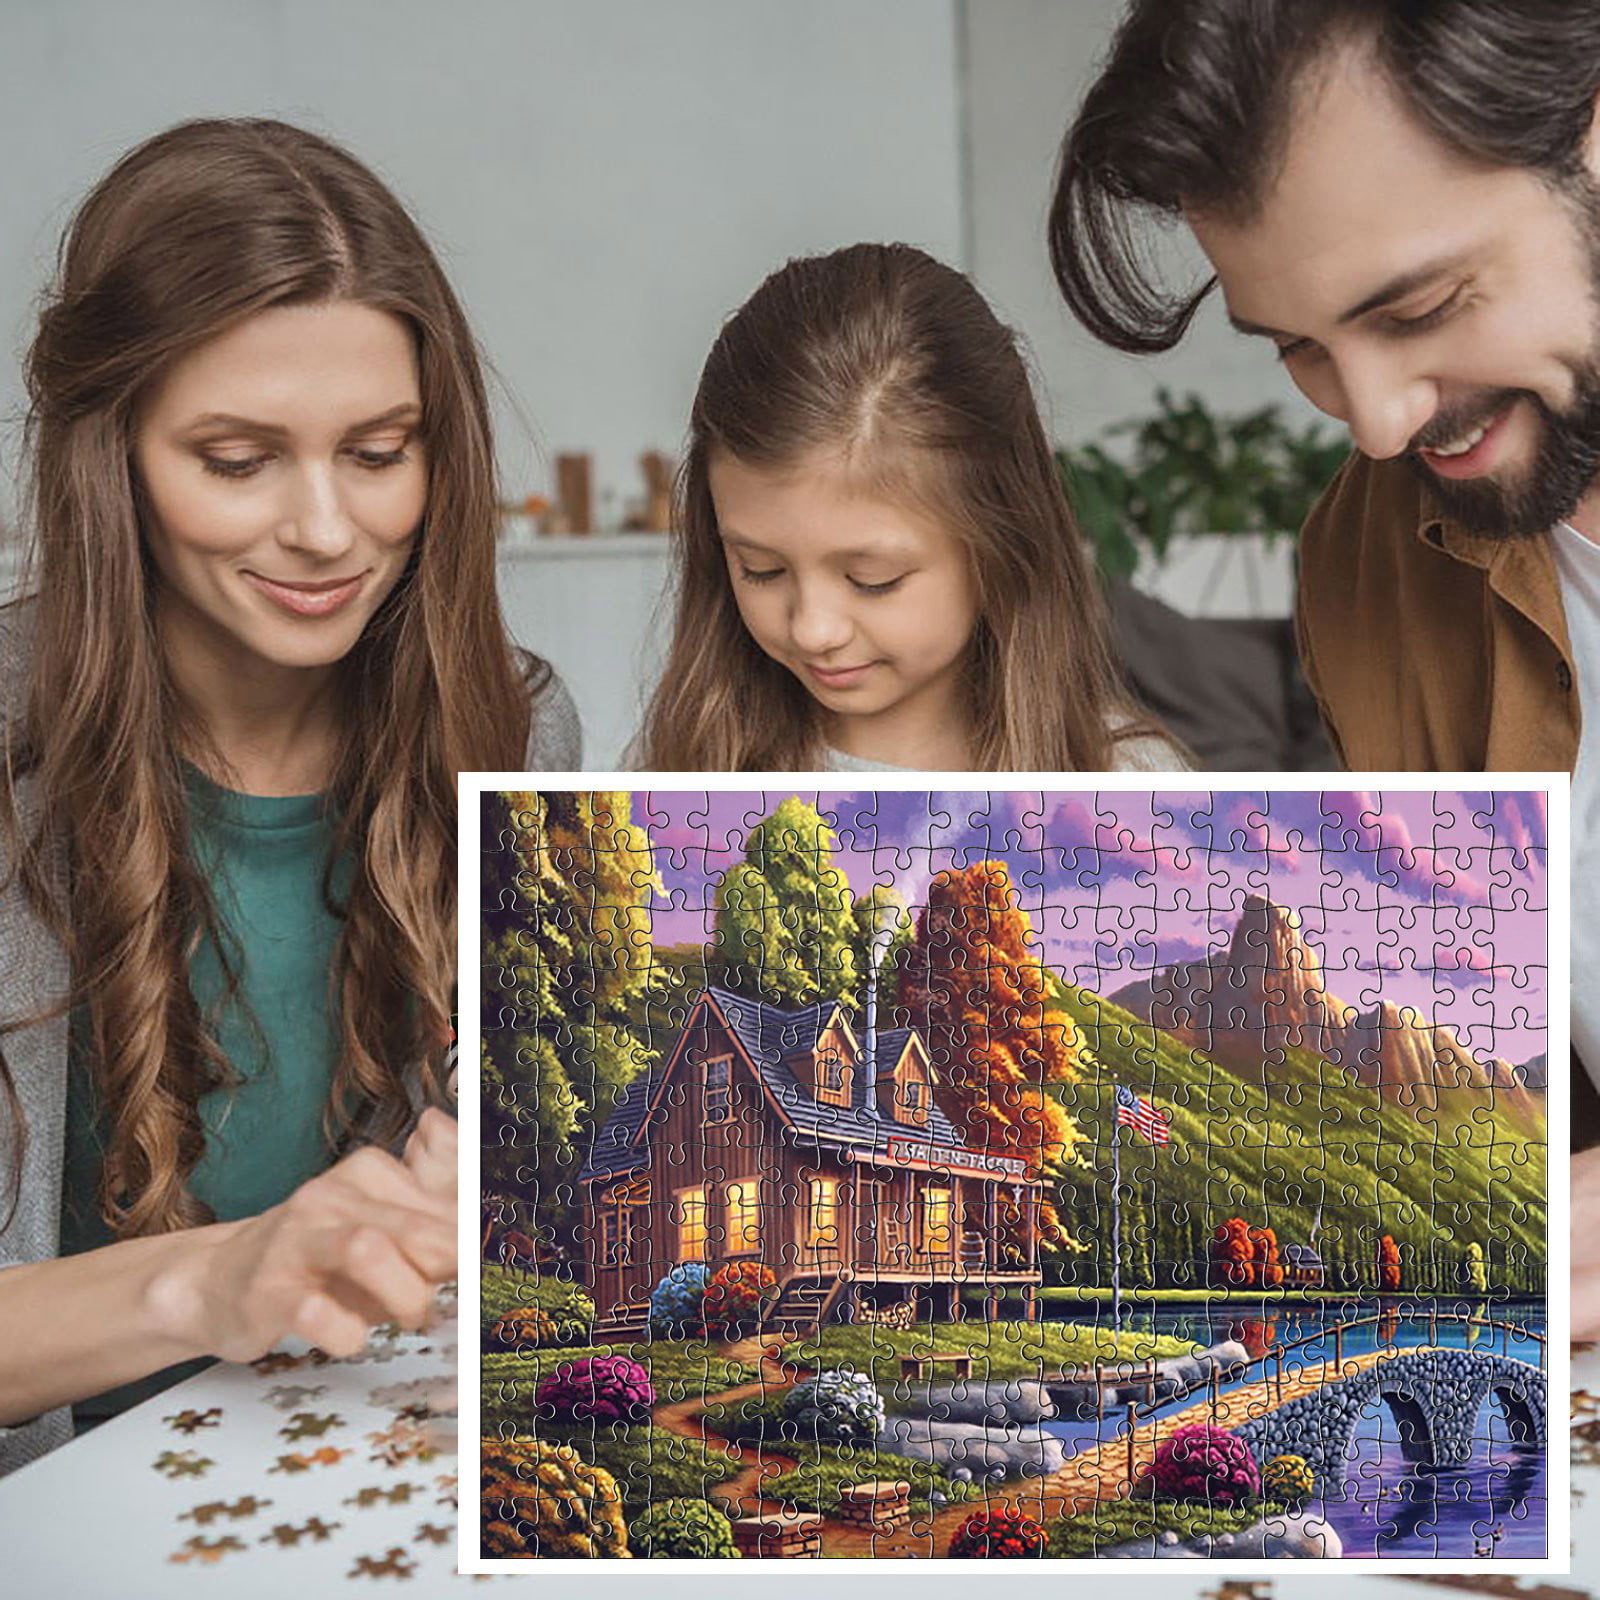 Details about   1000 Pieces Children Adult Kids Puzzles Educational Toy Jigsaw Puzzle Gift NEW 